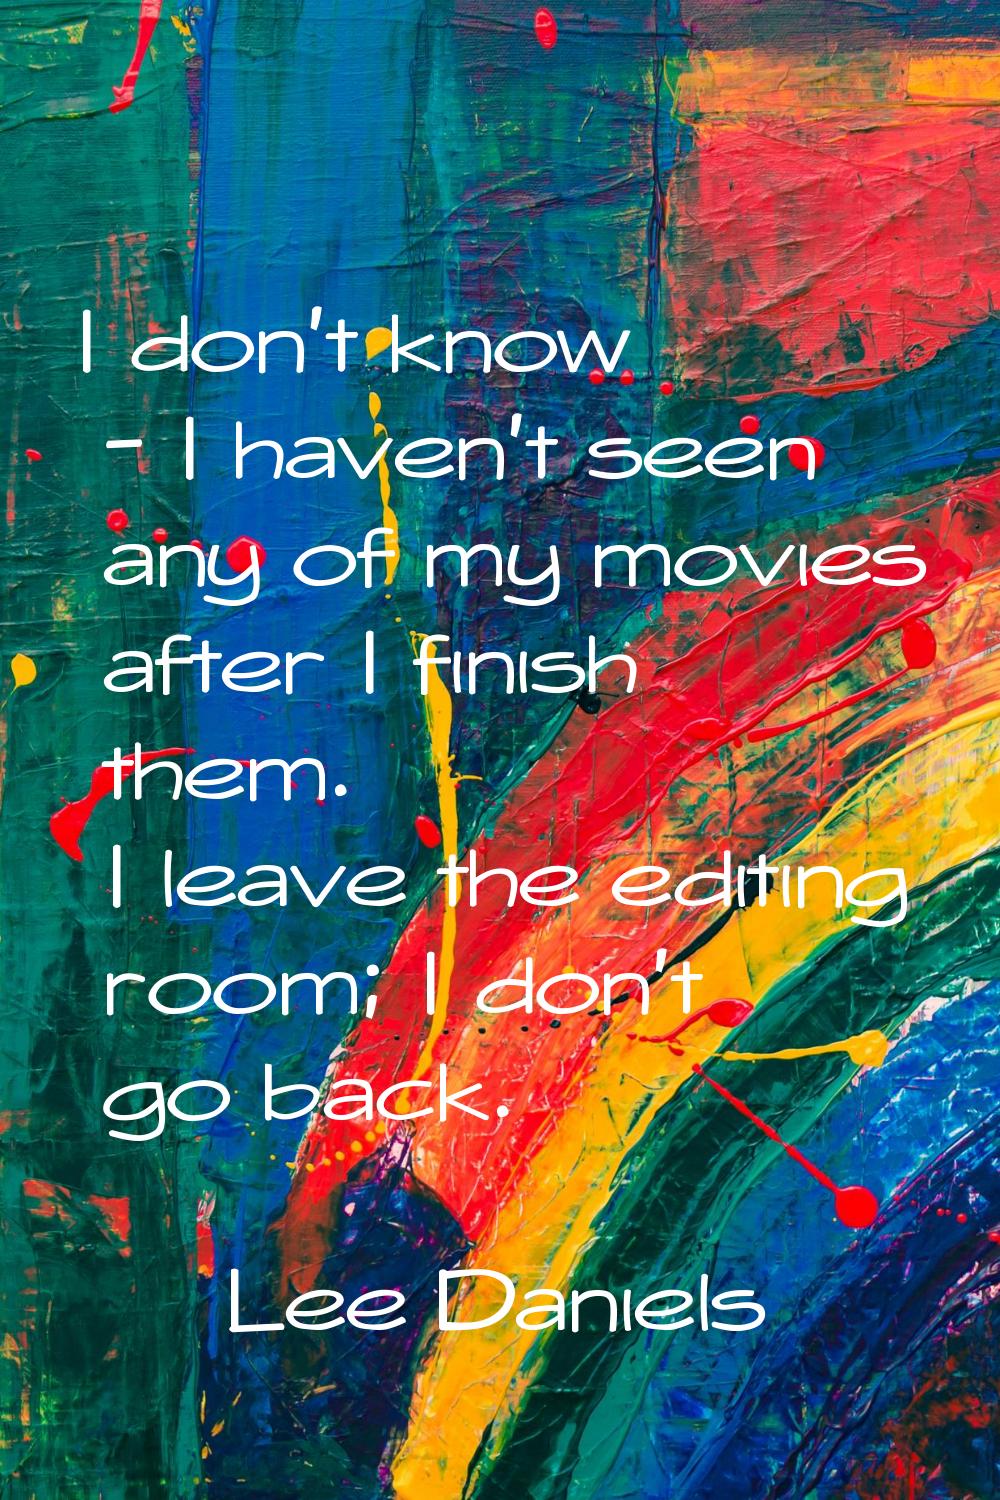 I don't know - I haven't seen any of my movies after I finish them. I leave the editing room; I don